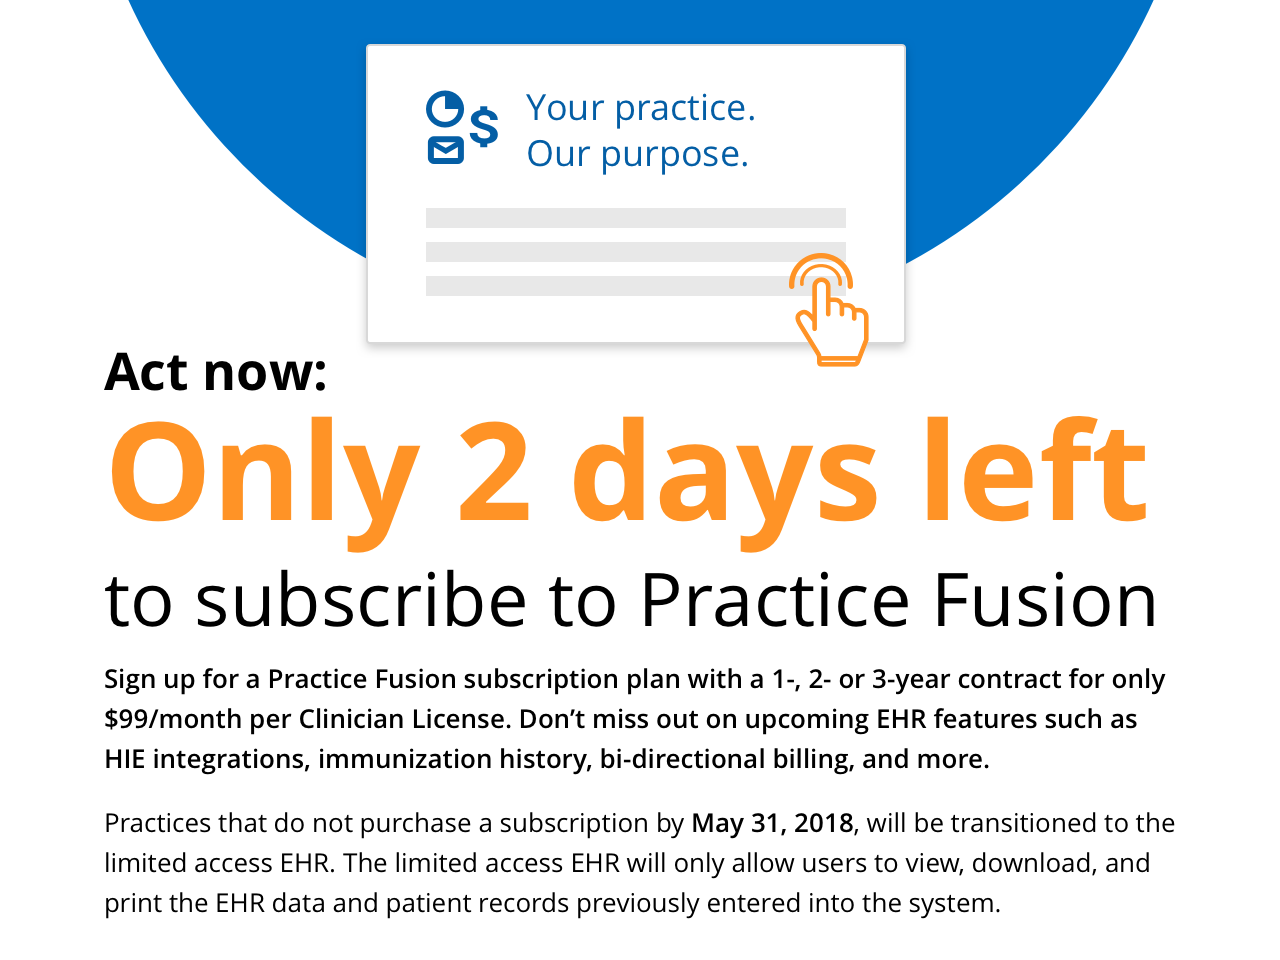 Sign up for a Practice Fusion subscription plan with a 1-, 2- or 3-year contract for only $99/month per Clinician License. Don't miss out on upcoming EHR features such as HIE integrations, immunization history, bi-directional billing, and more.